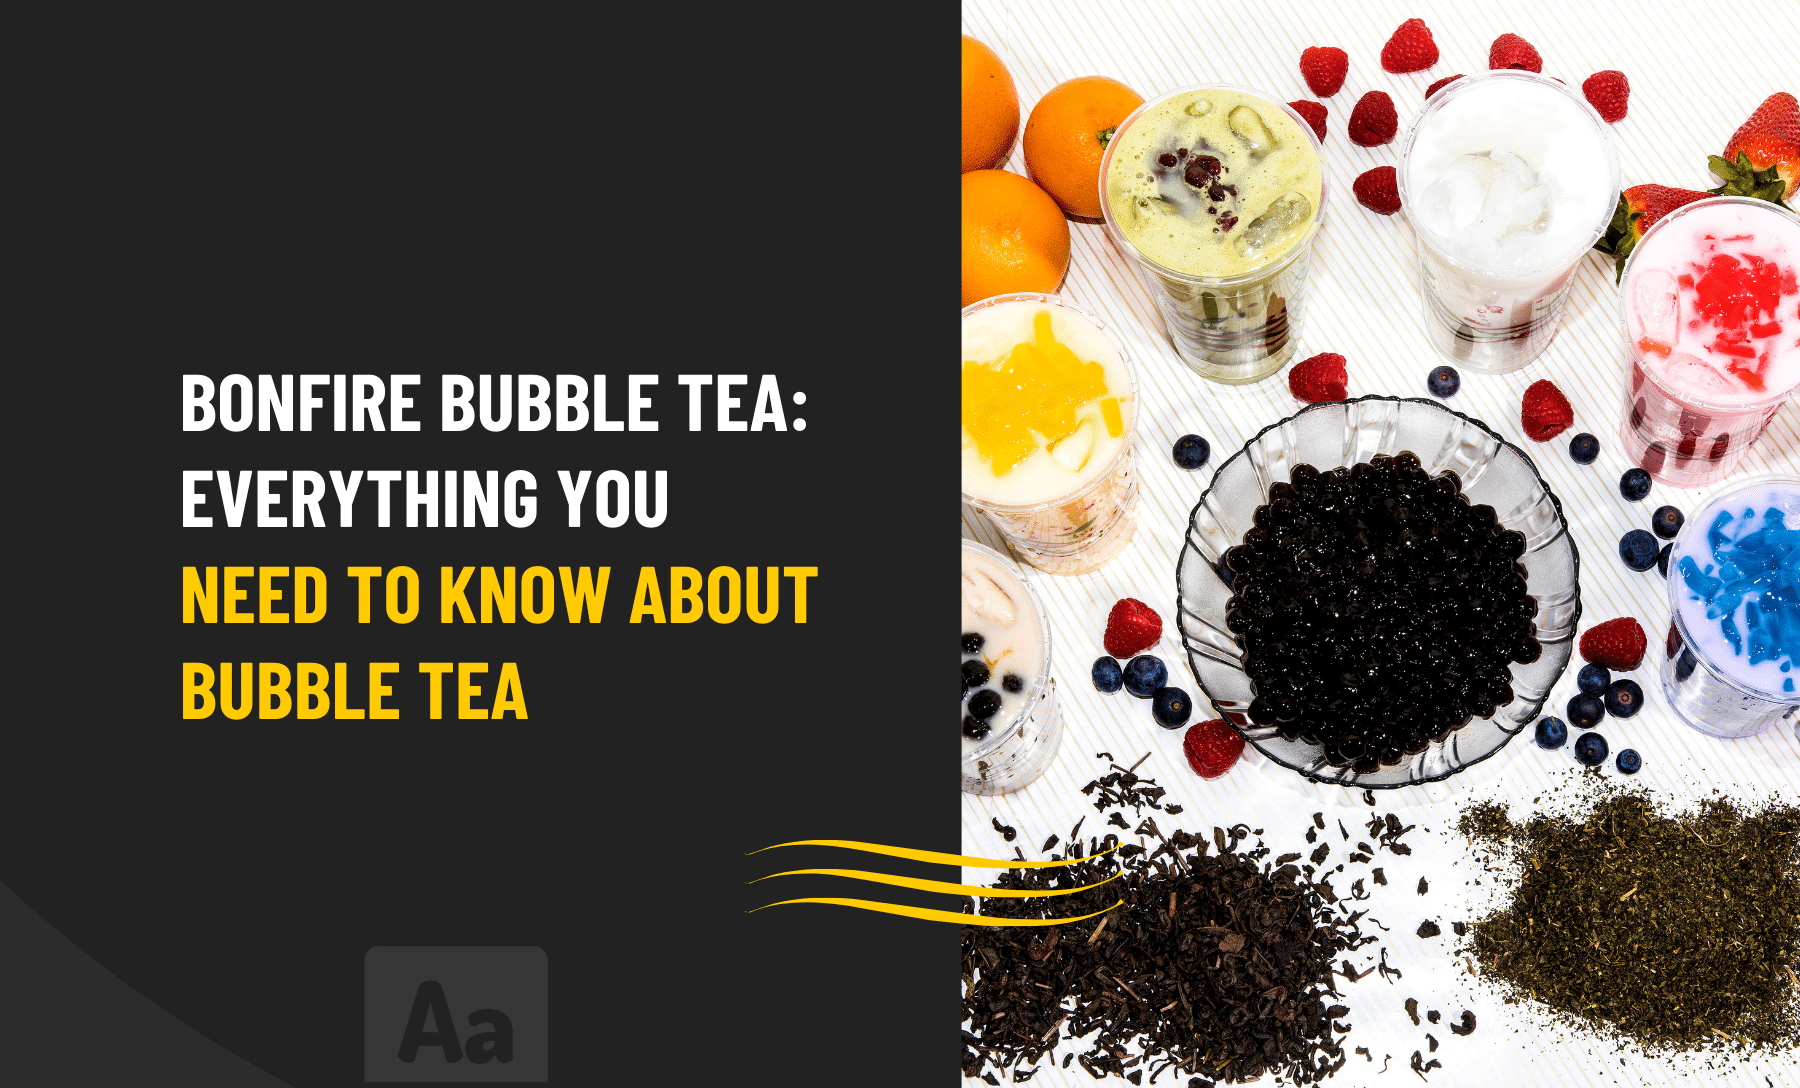 Everything you need to know about bubble tea